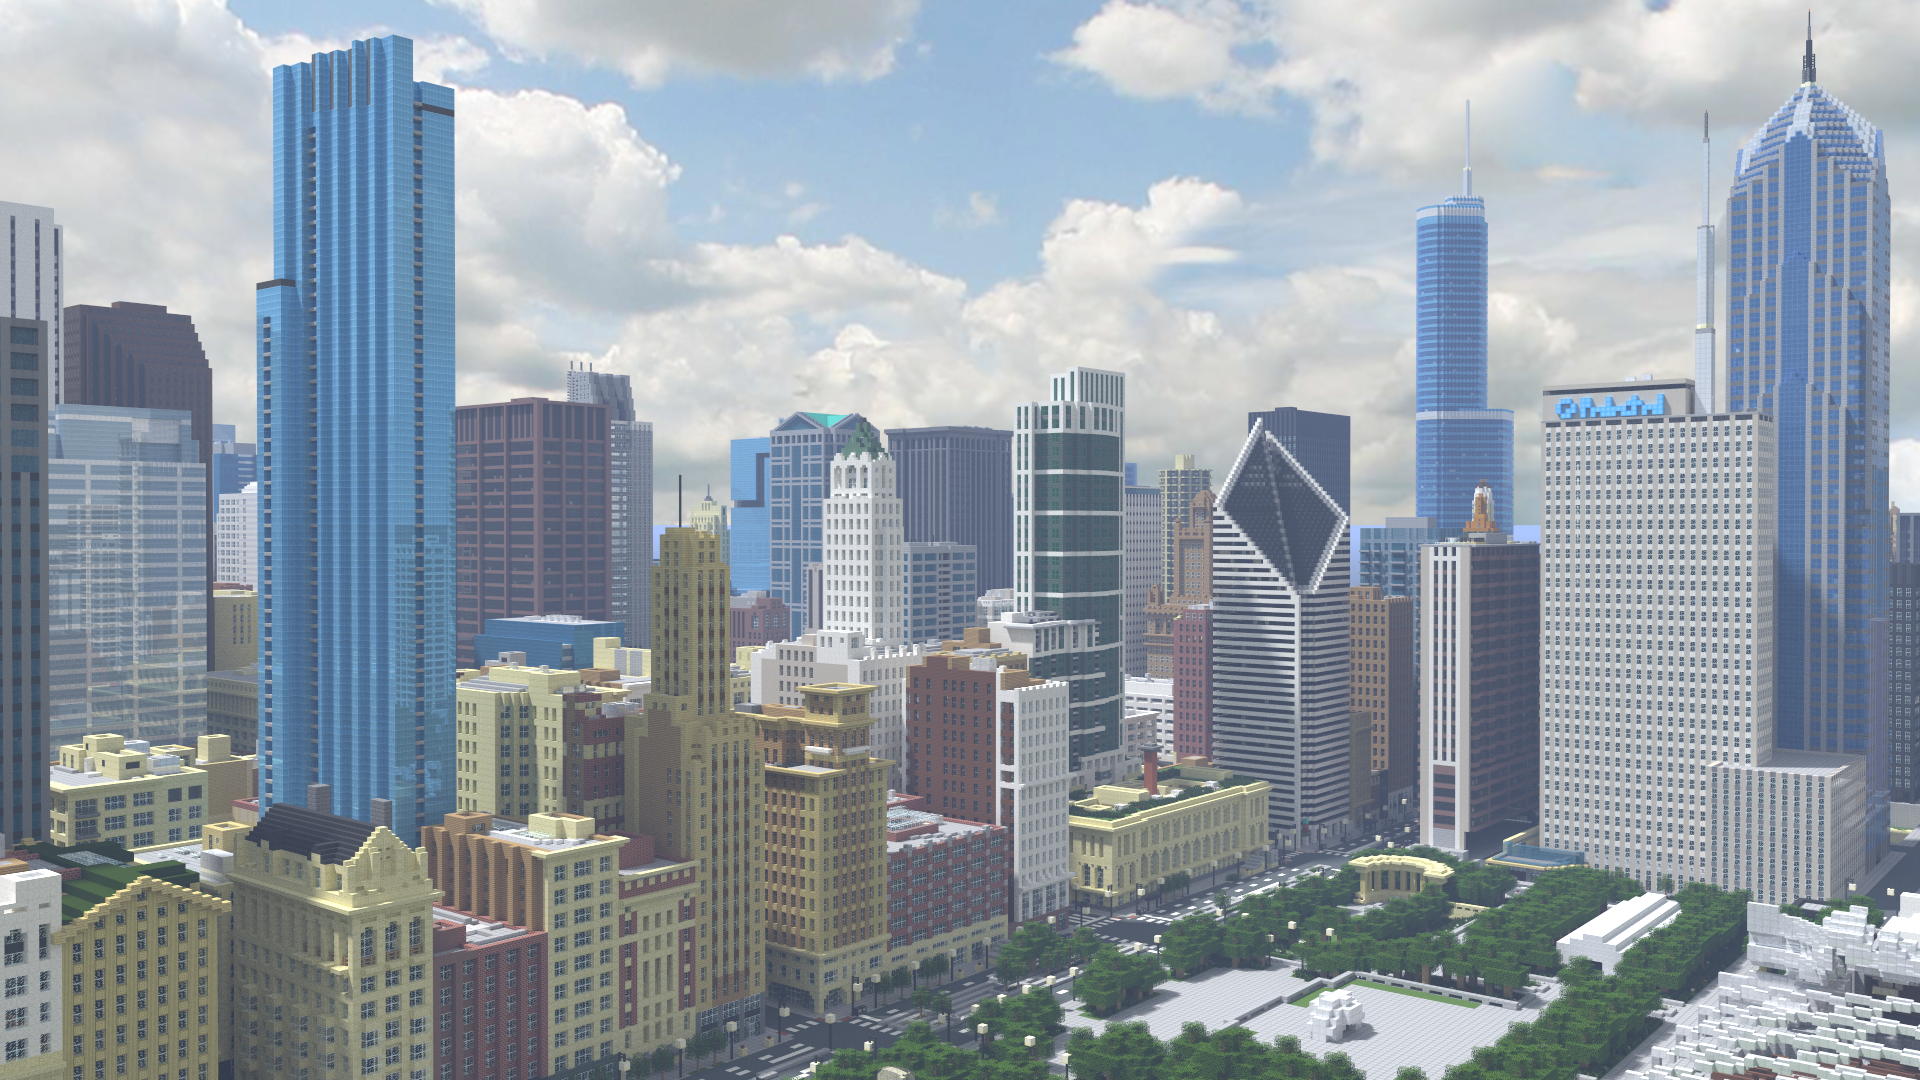 From trees to towers, this Minecraft model of Chicago is incredibly